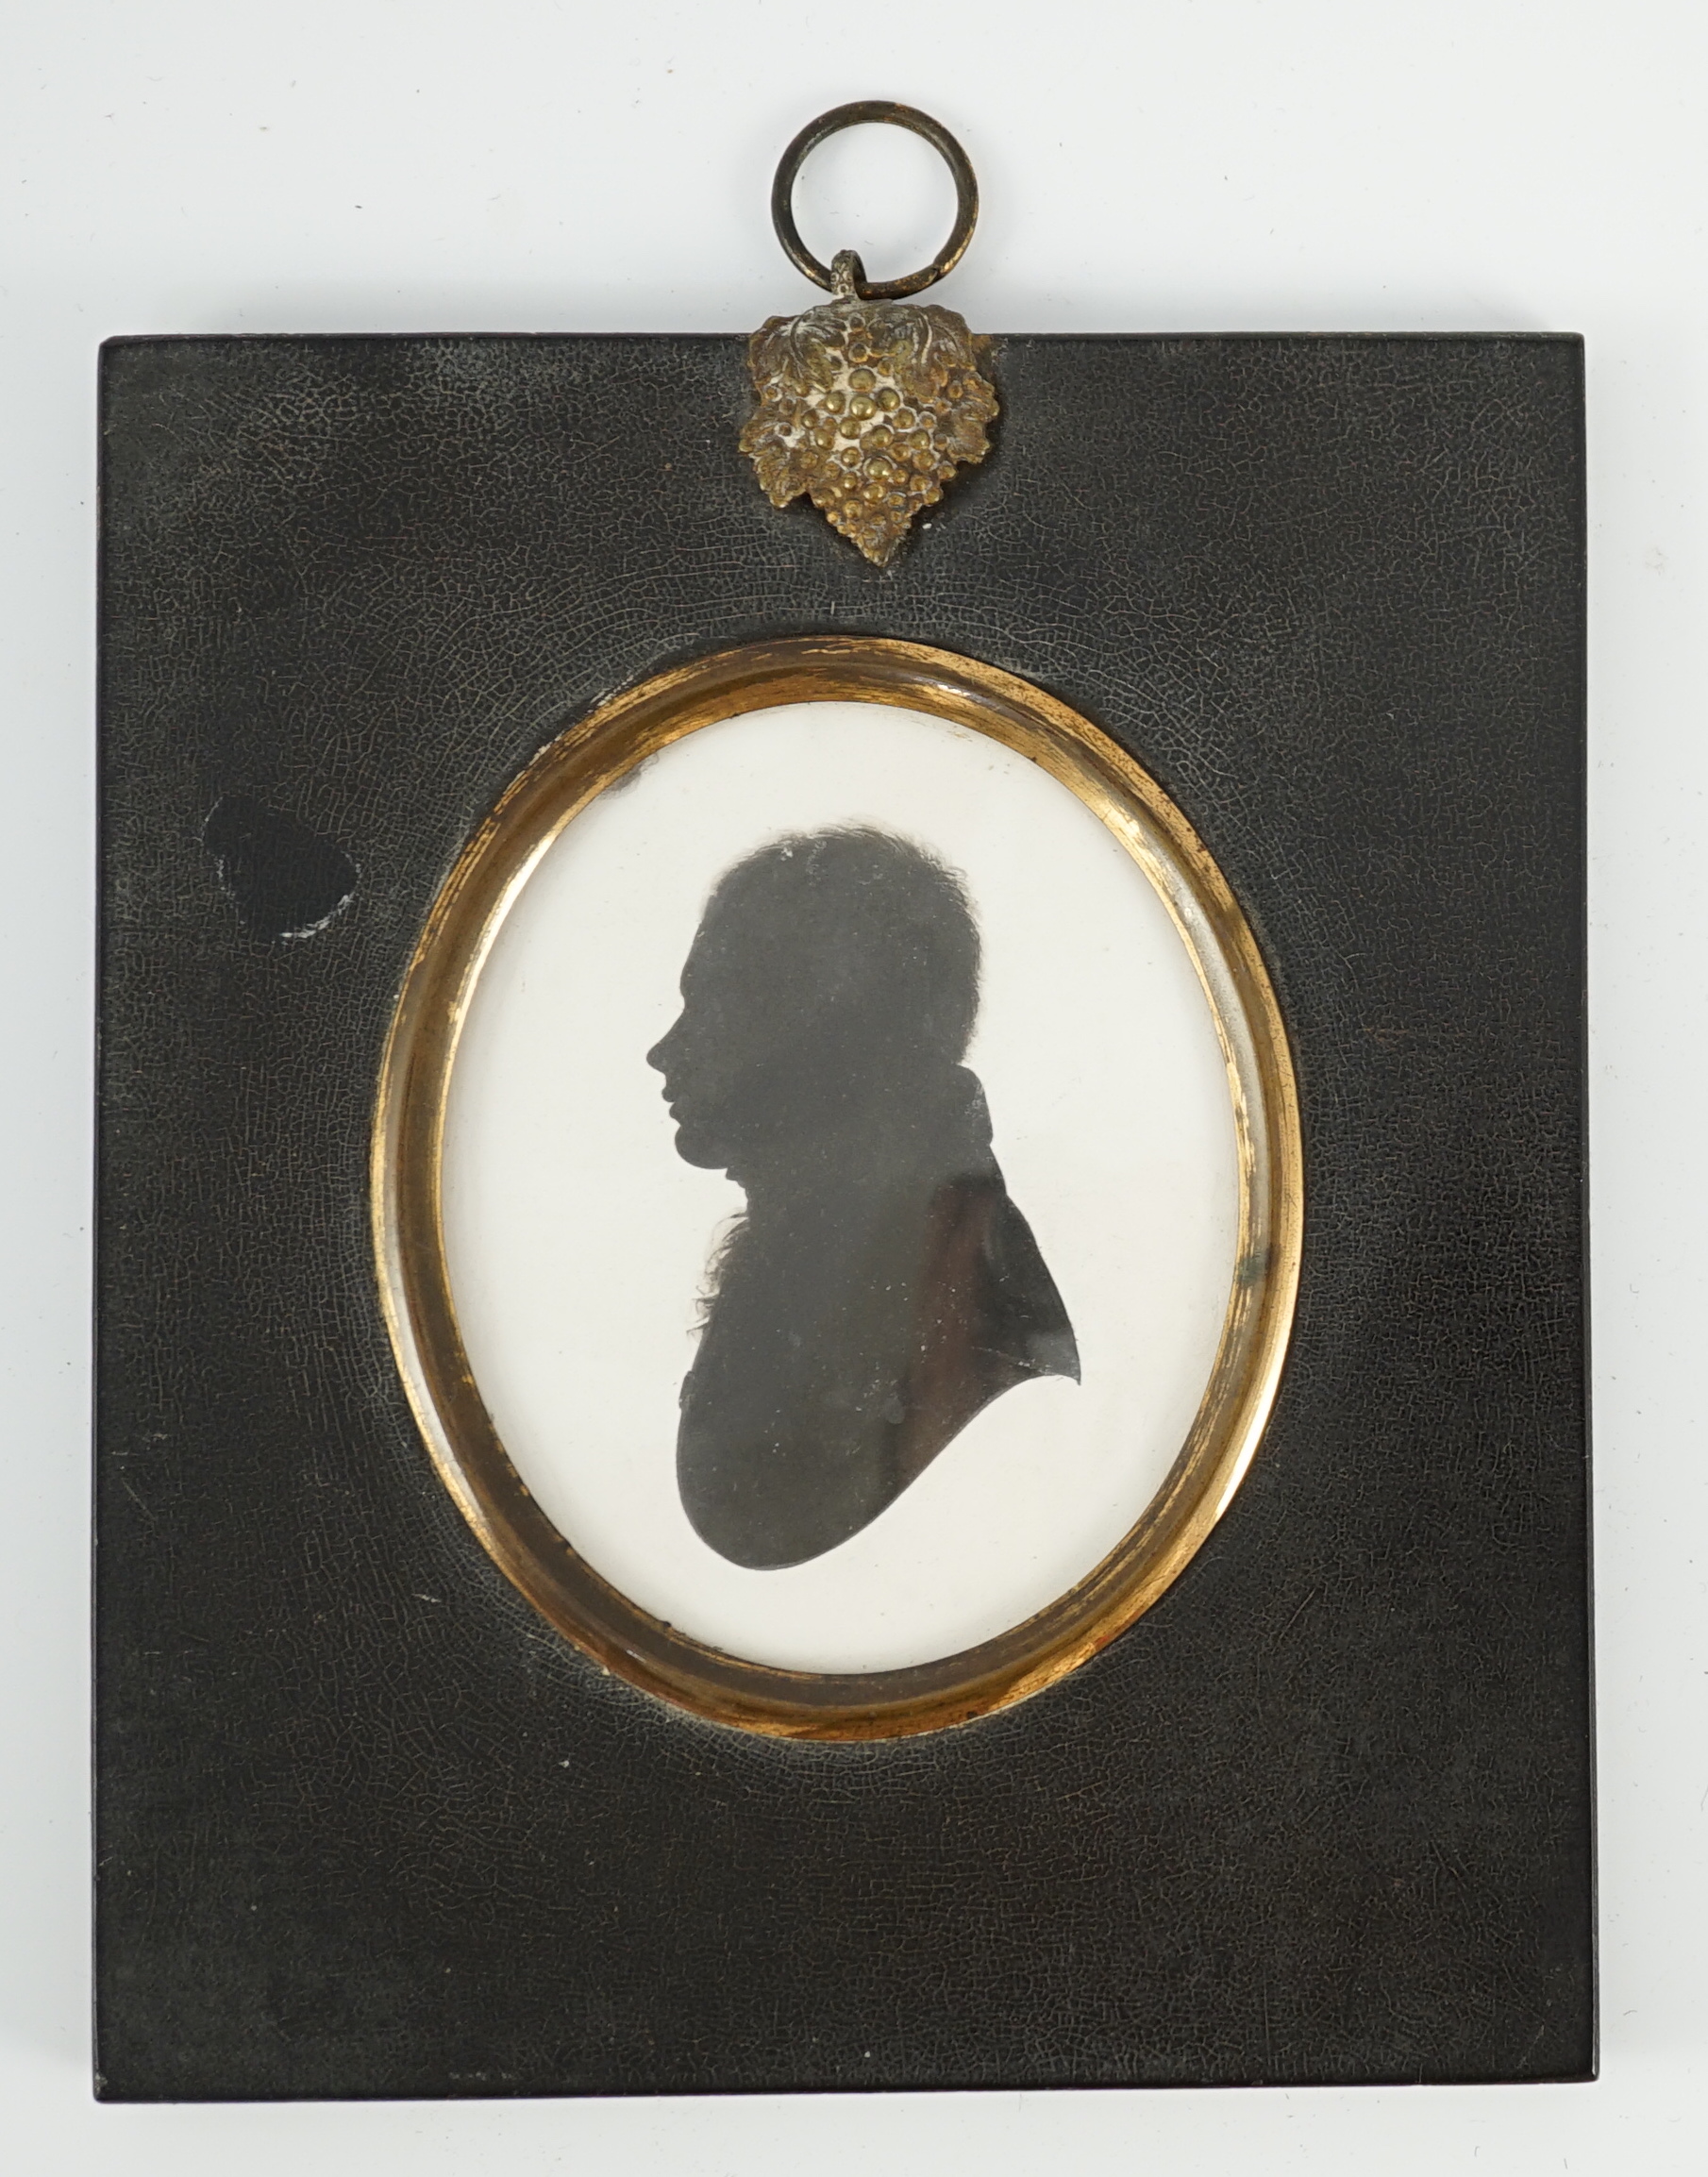 John Miers (1756-1821), Silhouette of a gentleman, painted plaster, 8 x 6.5cm.